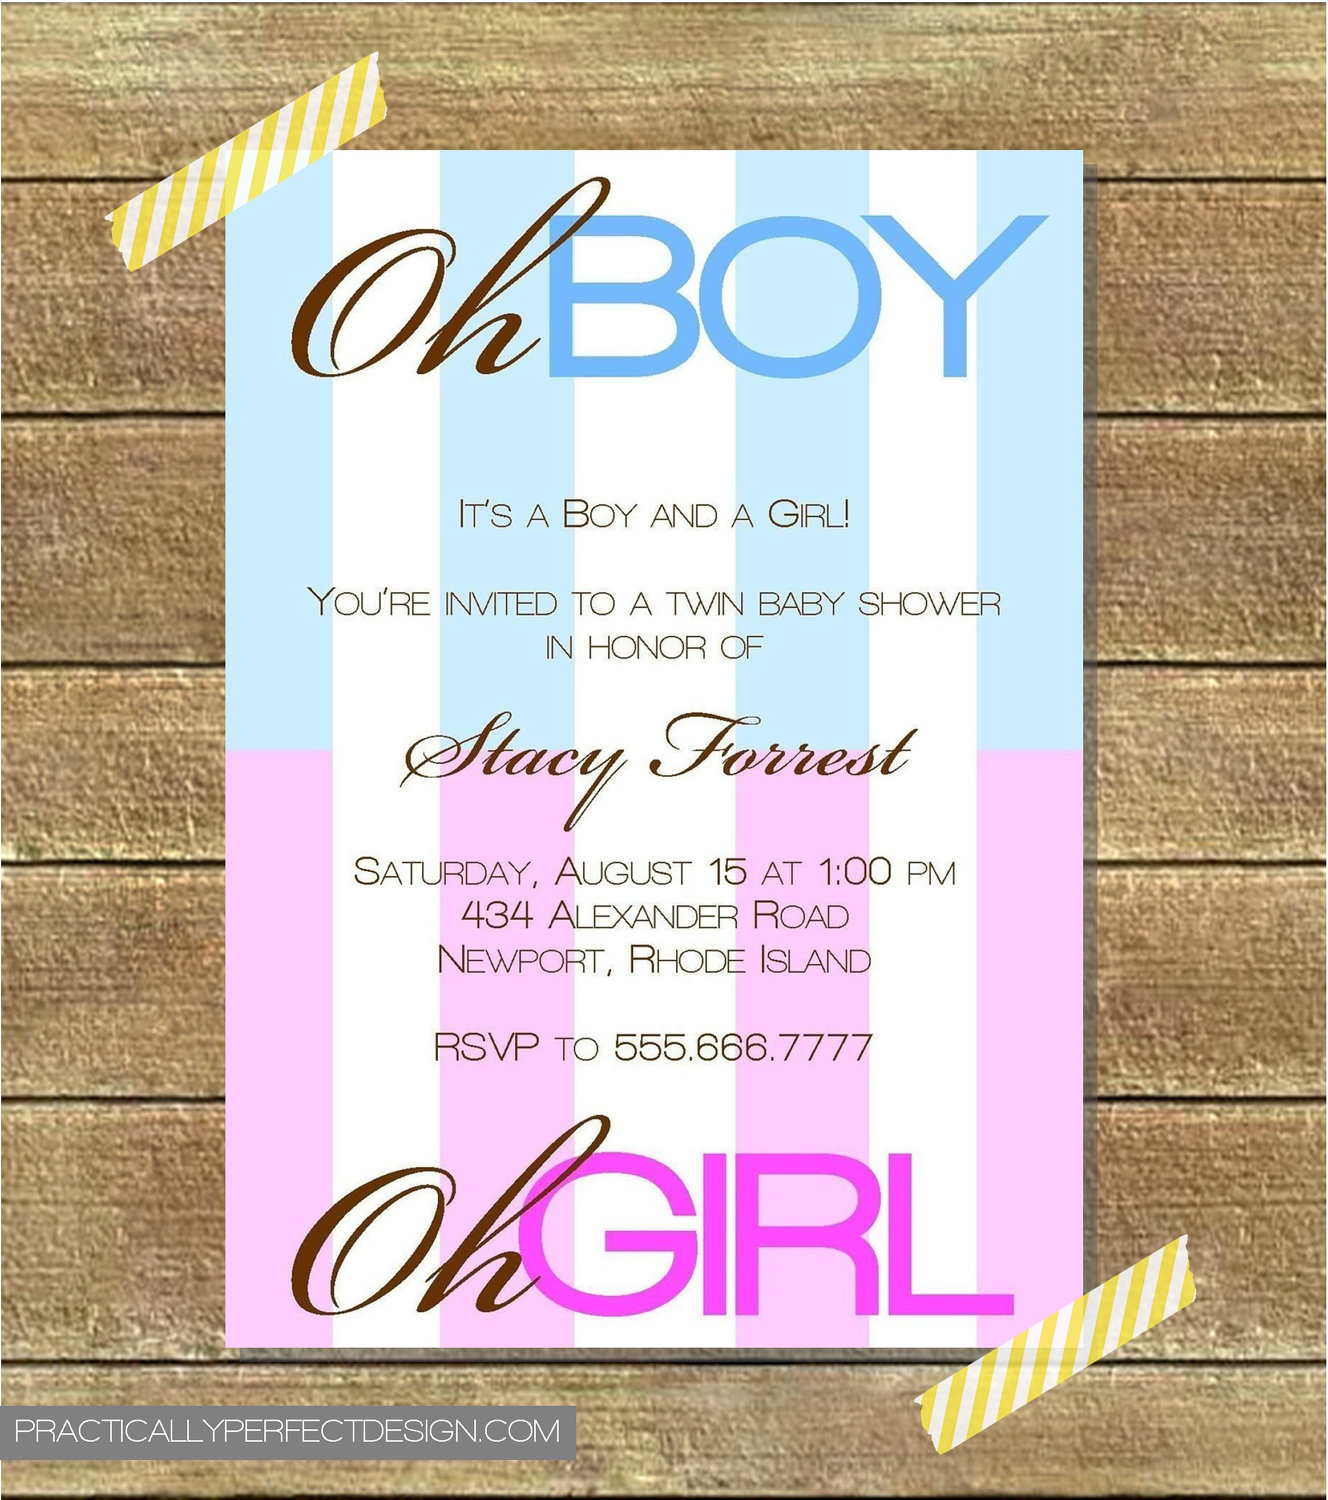 10 Pretty Baby Shower Ideas For Second Baby photo baby shower invitation wording image 2024